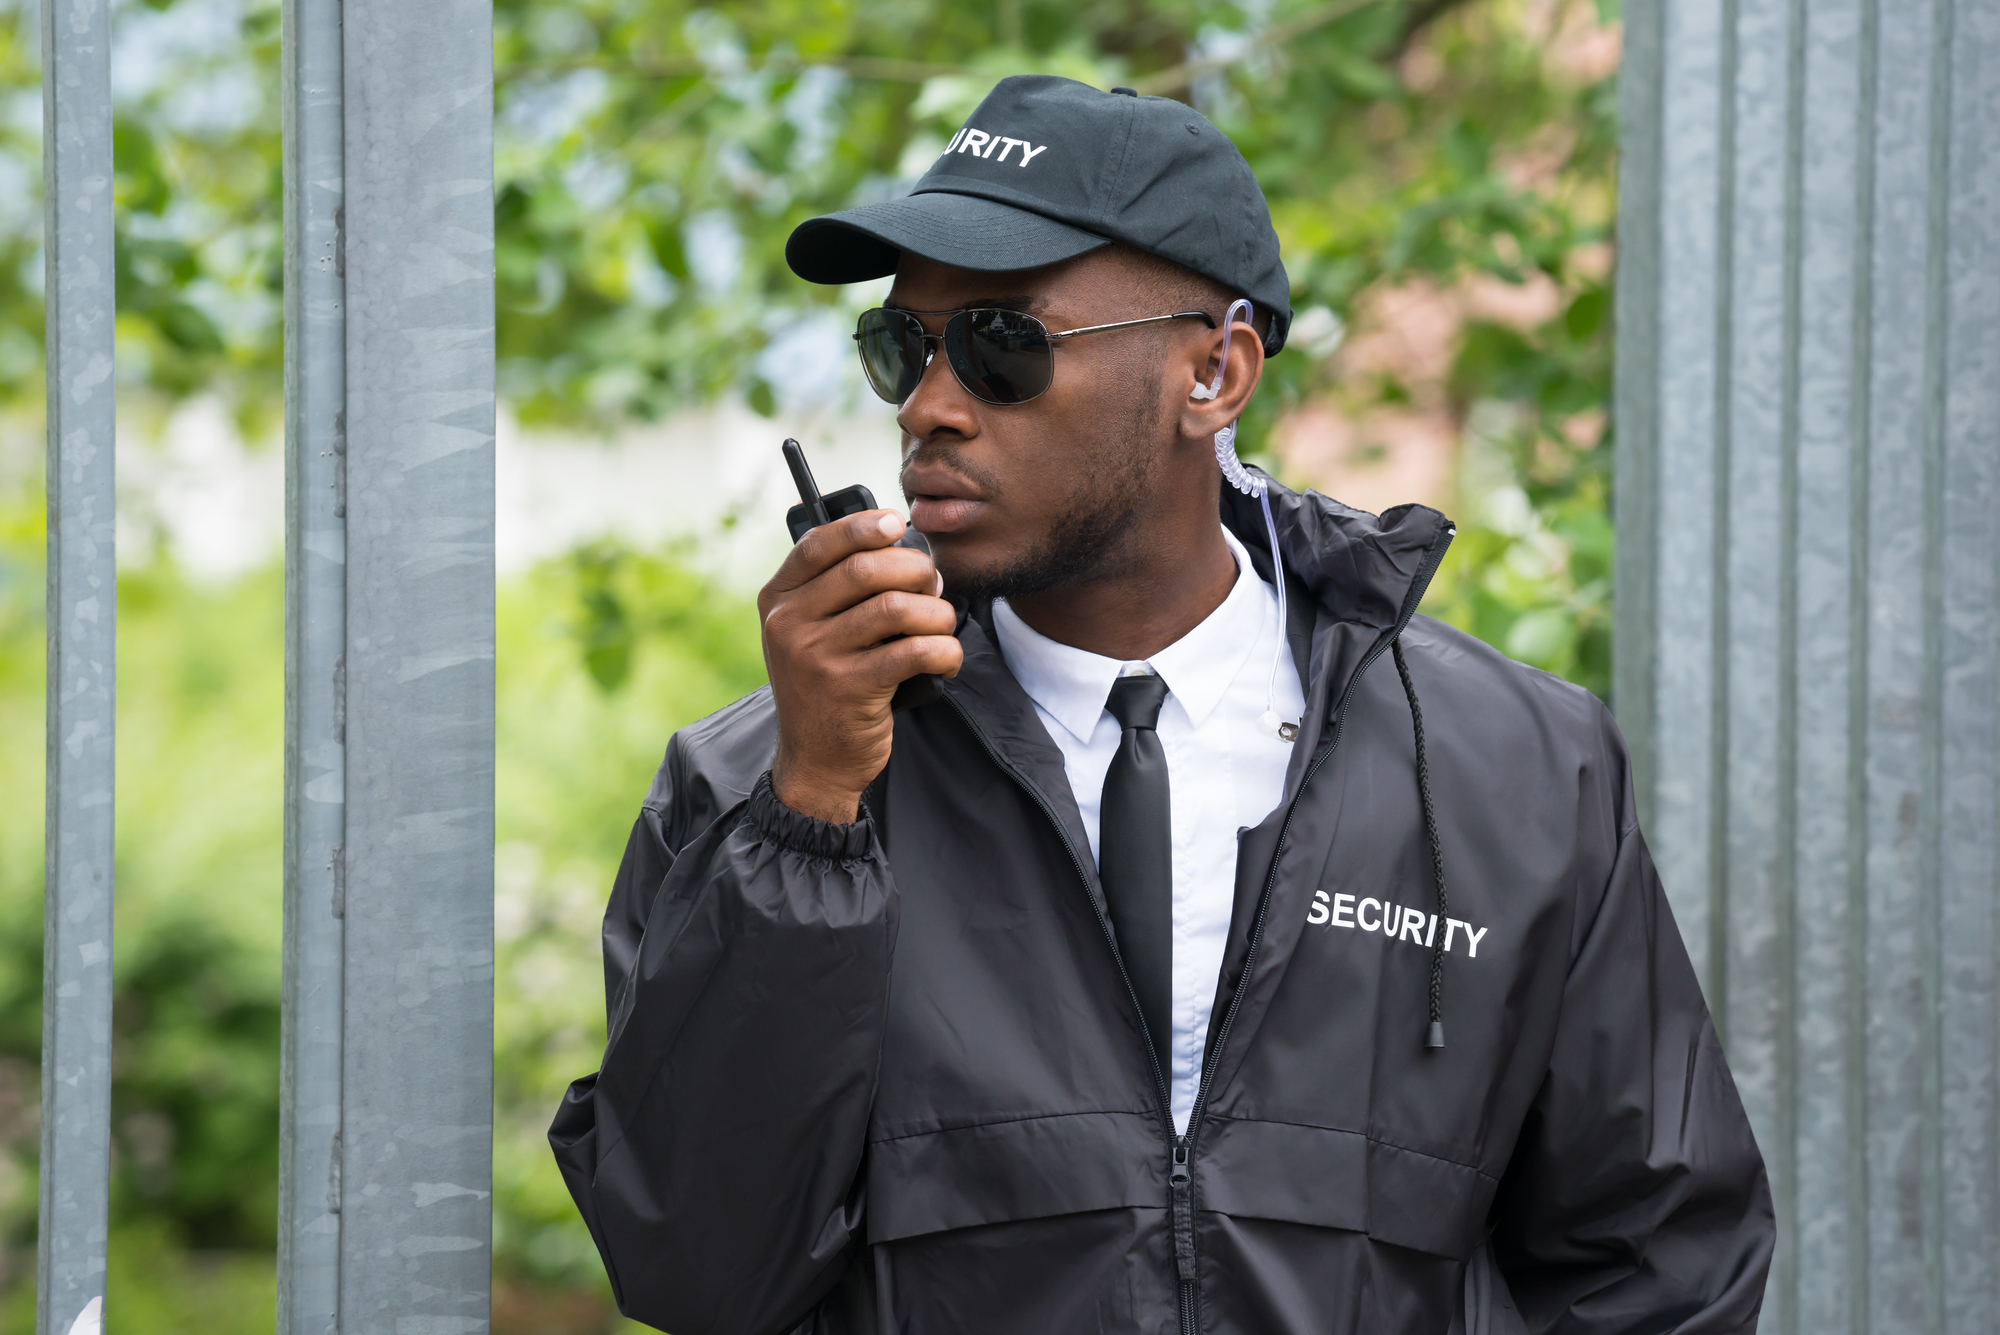 Young Male Security Guard In Black Uniform Using Walkie-Talkie